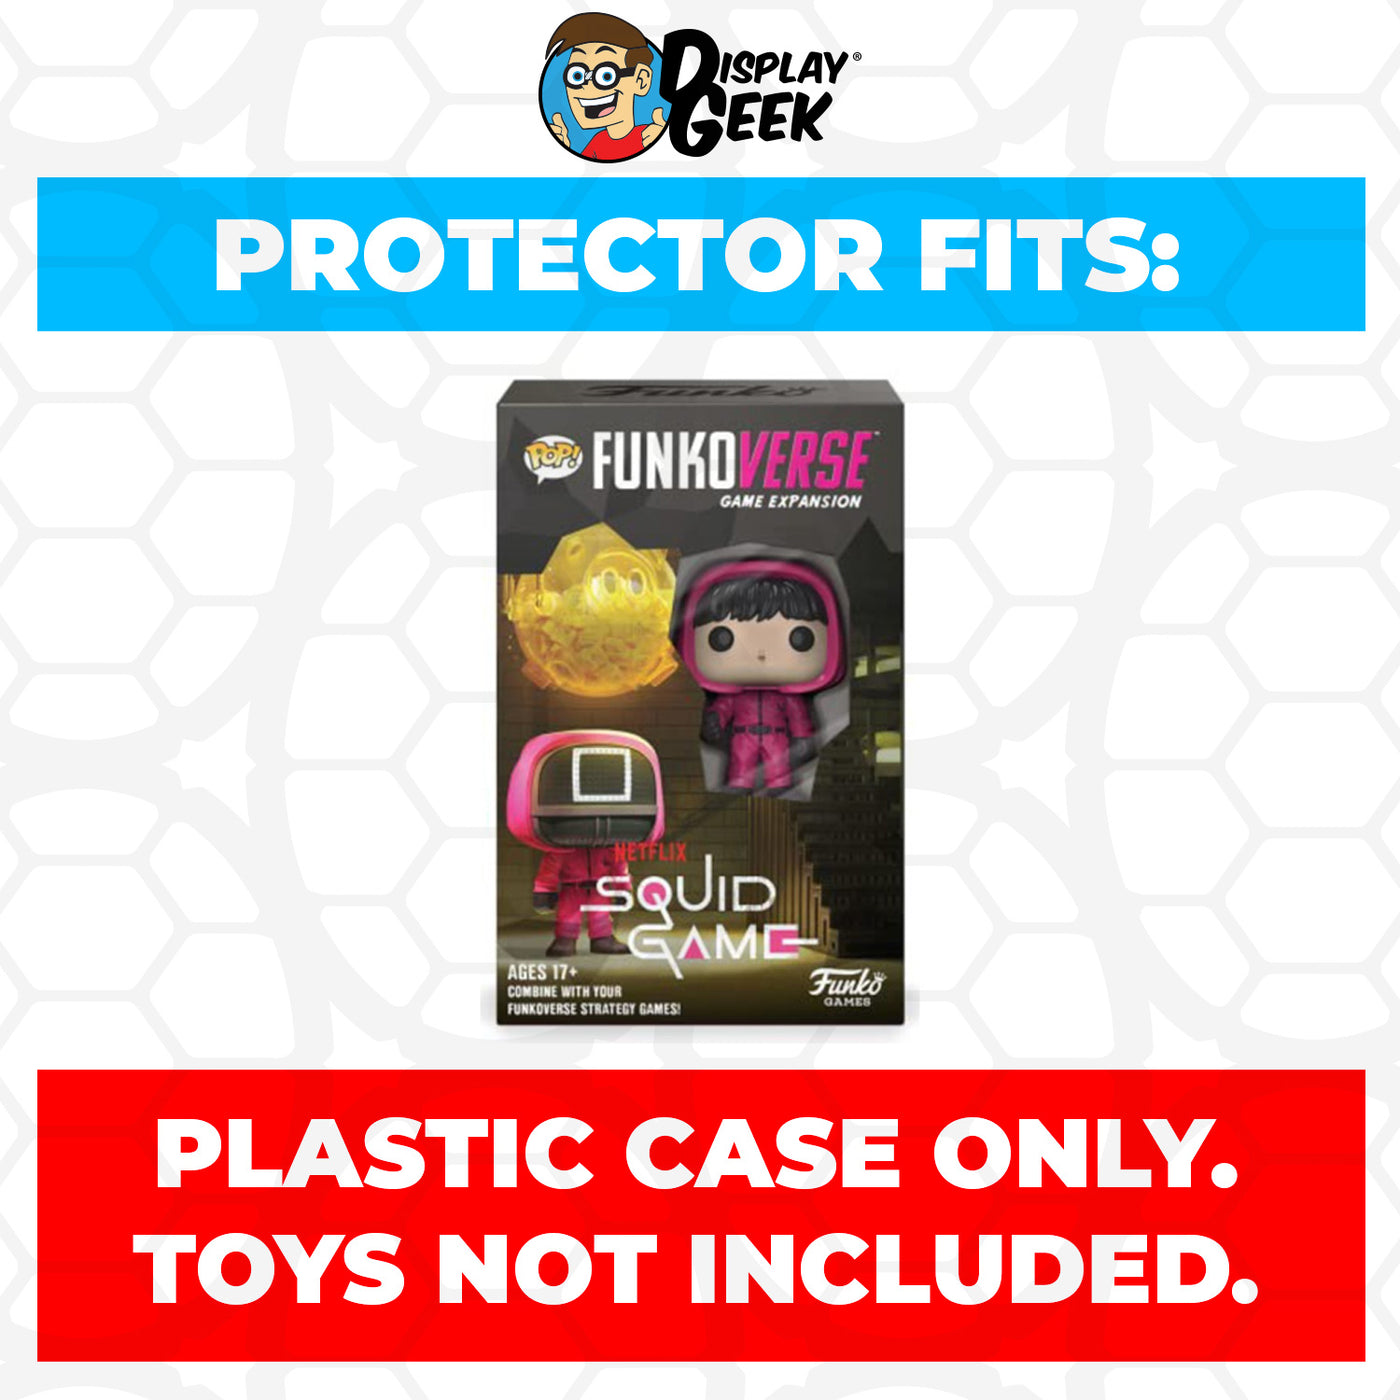 Pop Protector for Funkoverse Squid Game 101 Funko Expansion on The Protector Guide App by Display Geek